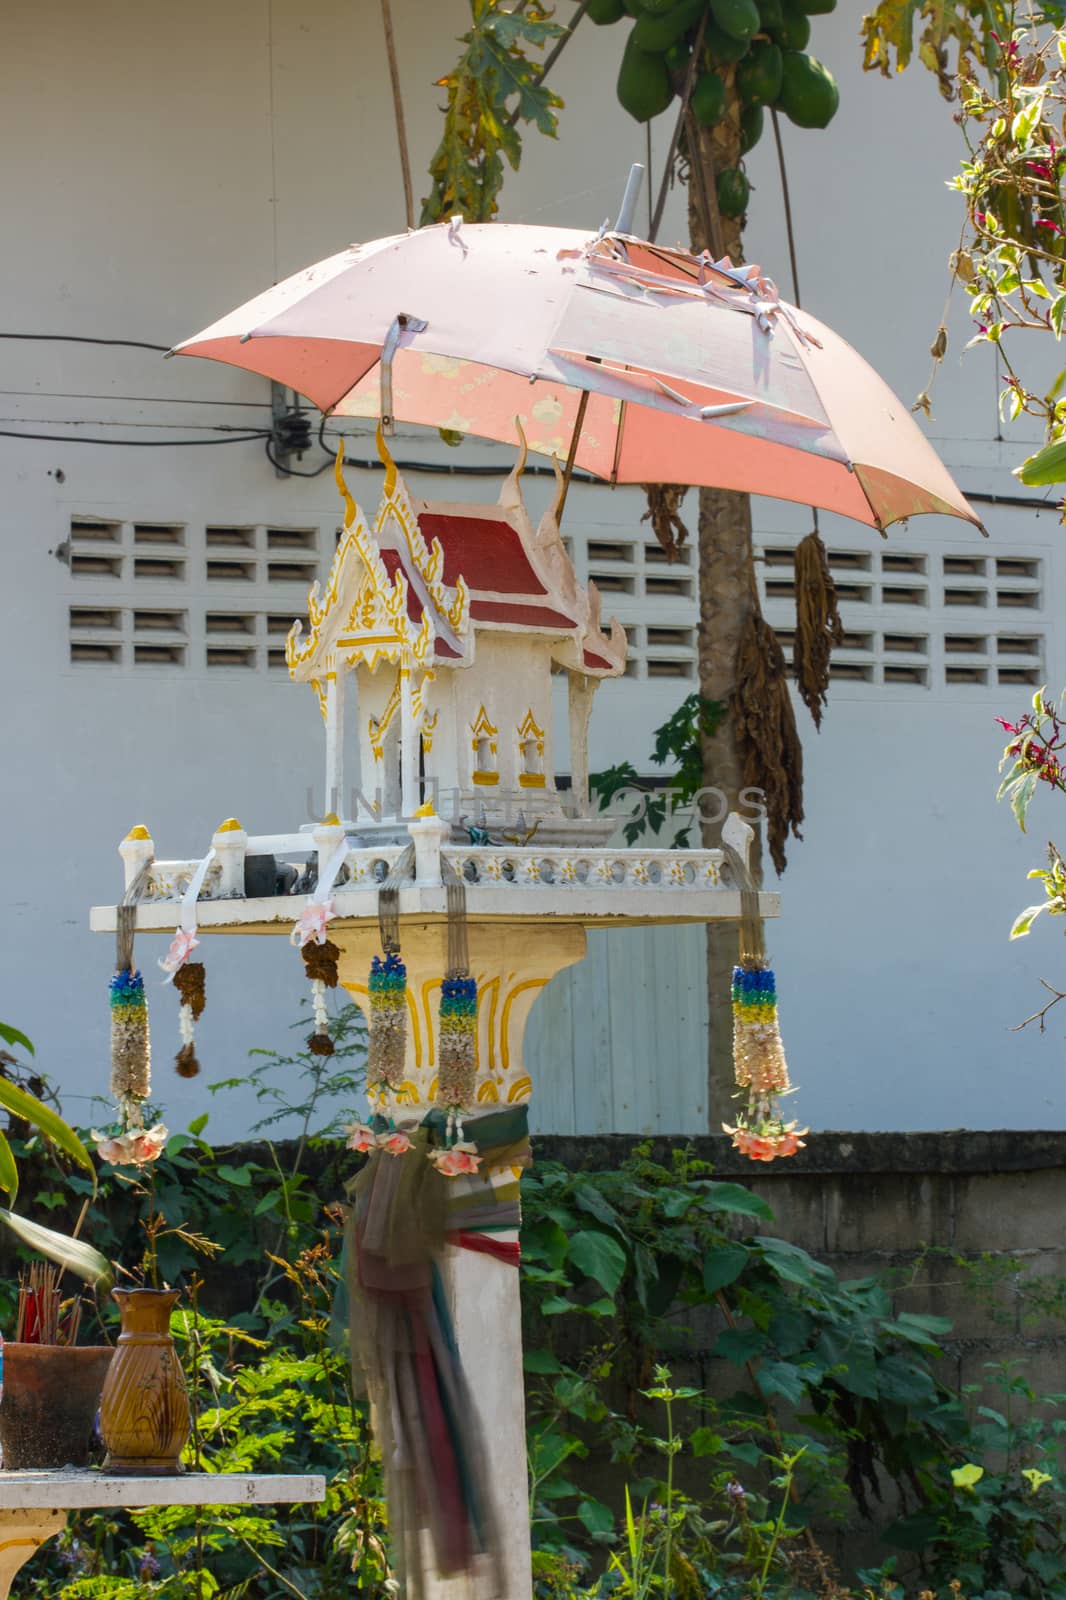 white spirit house in thailand with old umbrella over it